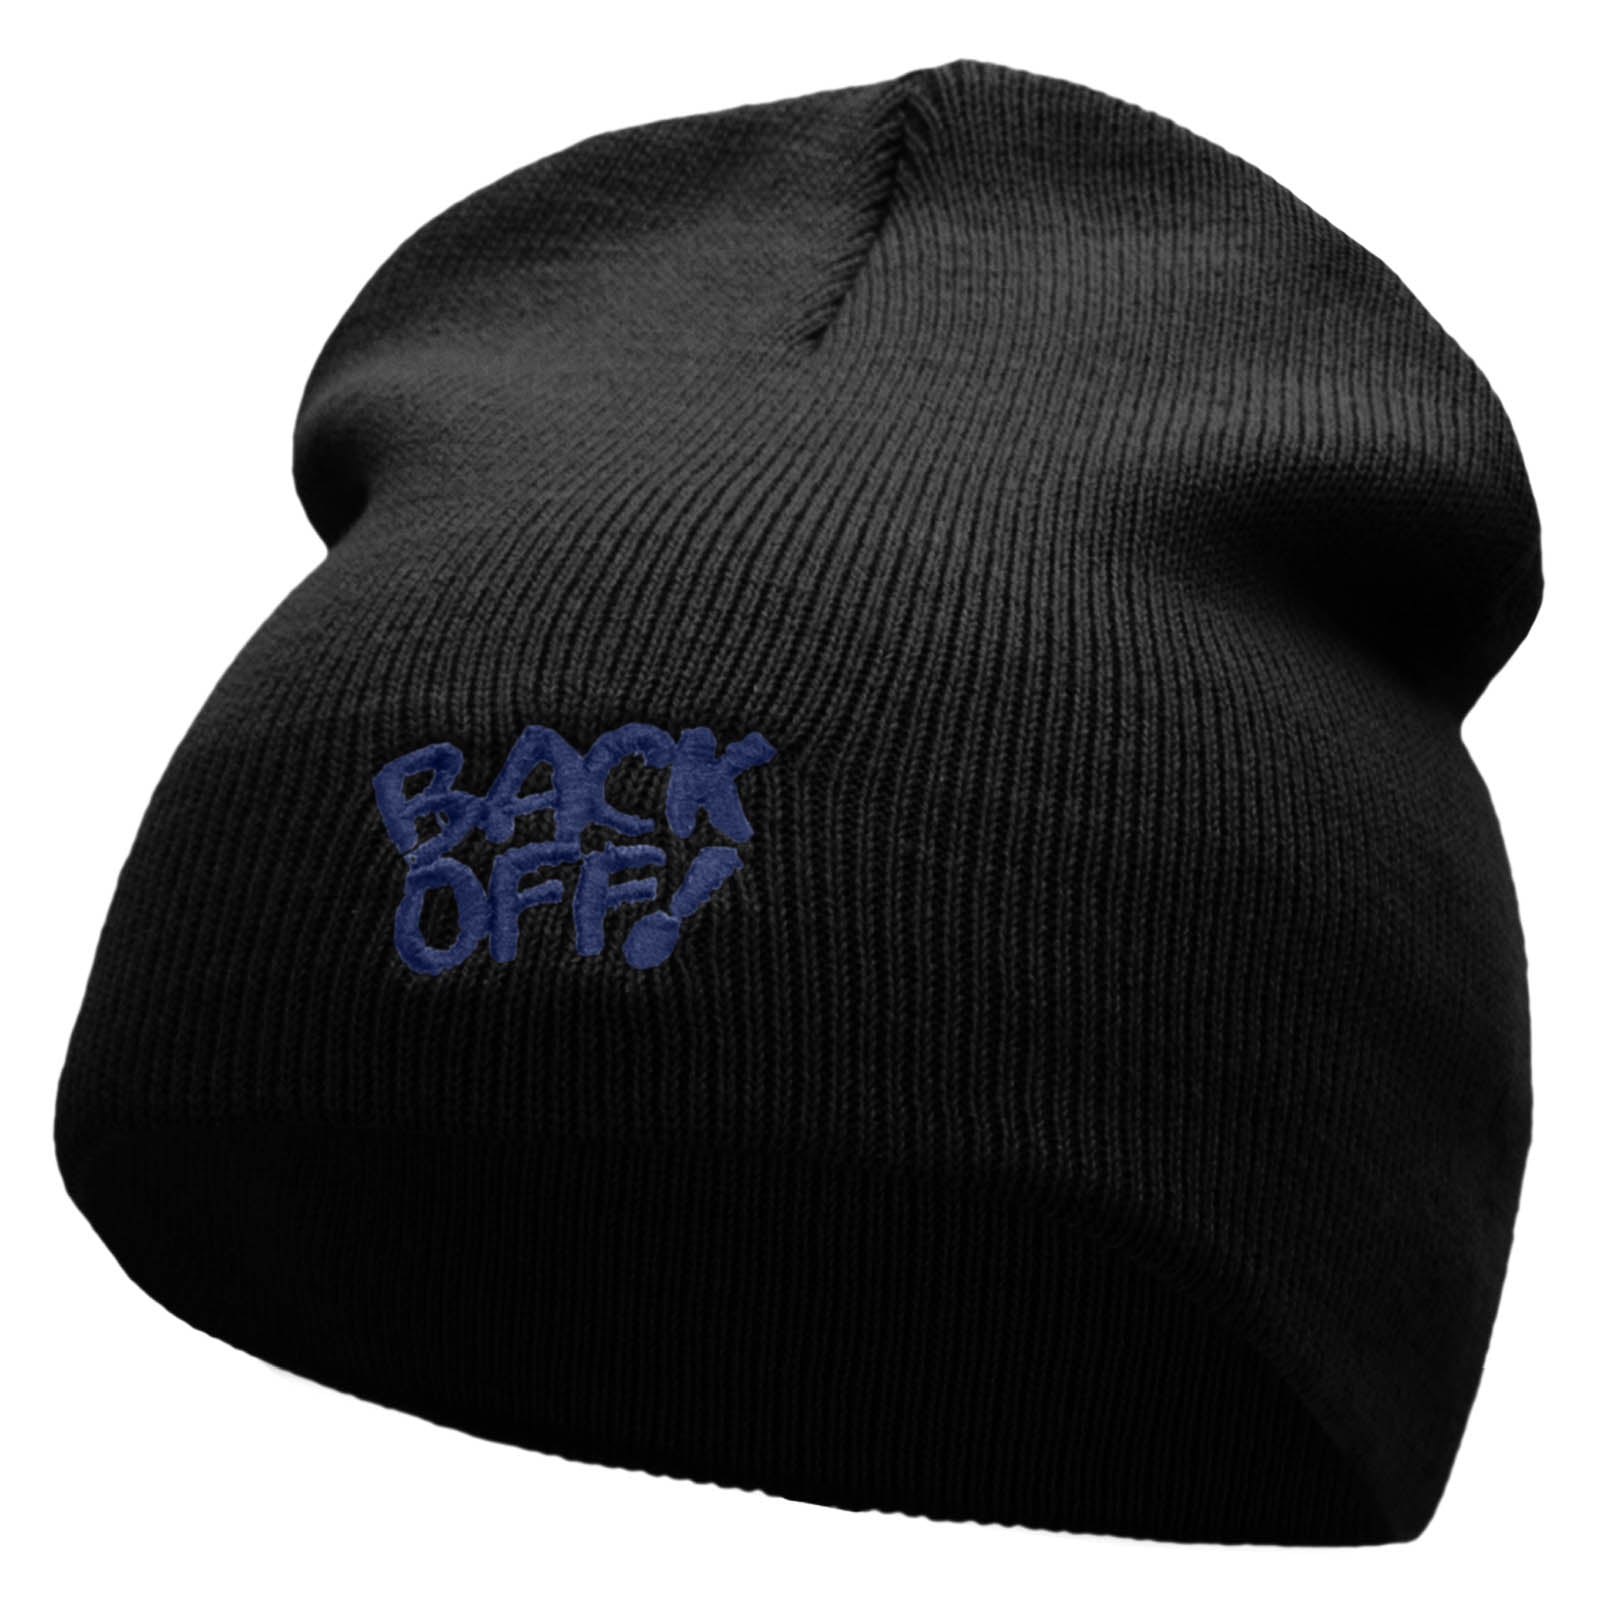 Back Off Saying Embroidered Short Beanie - Black OSFM